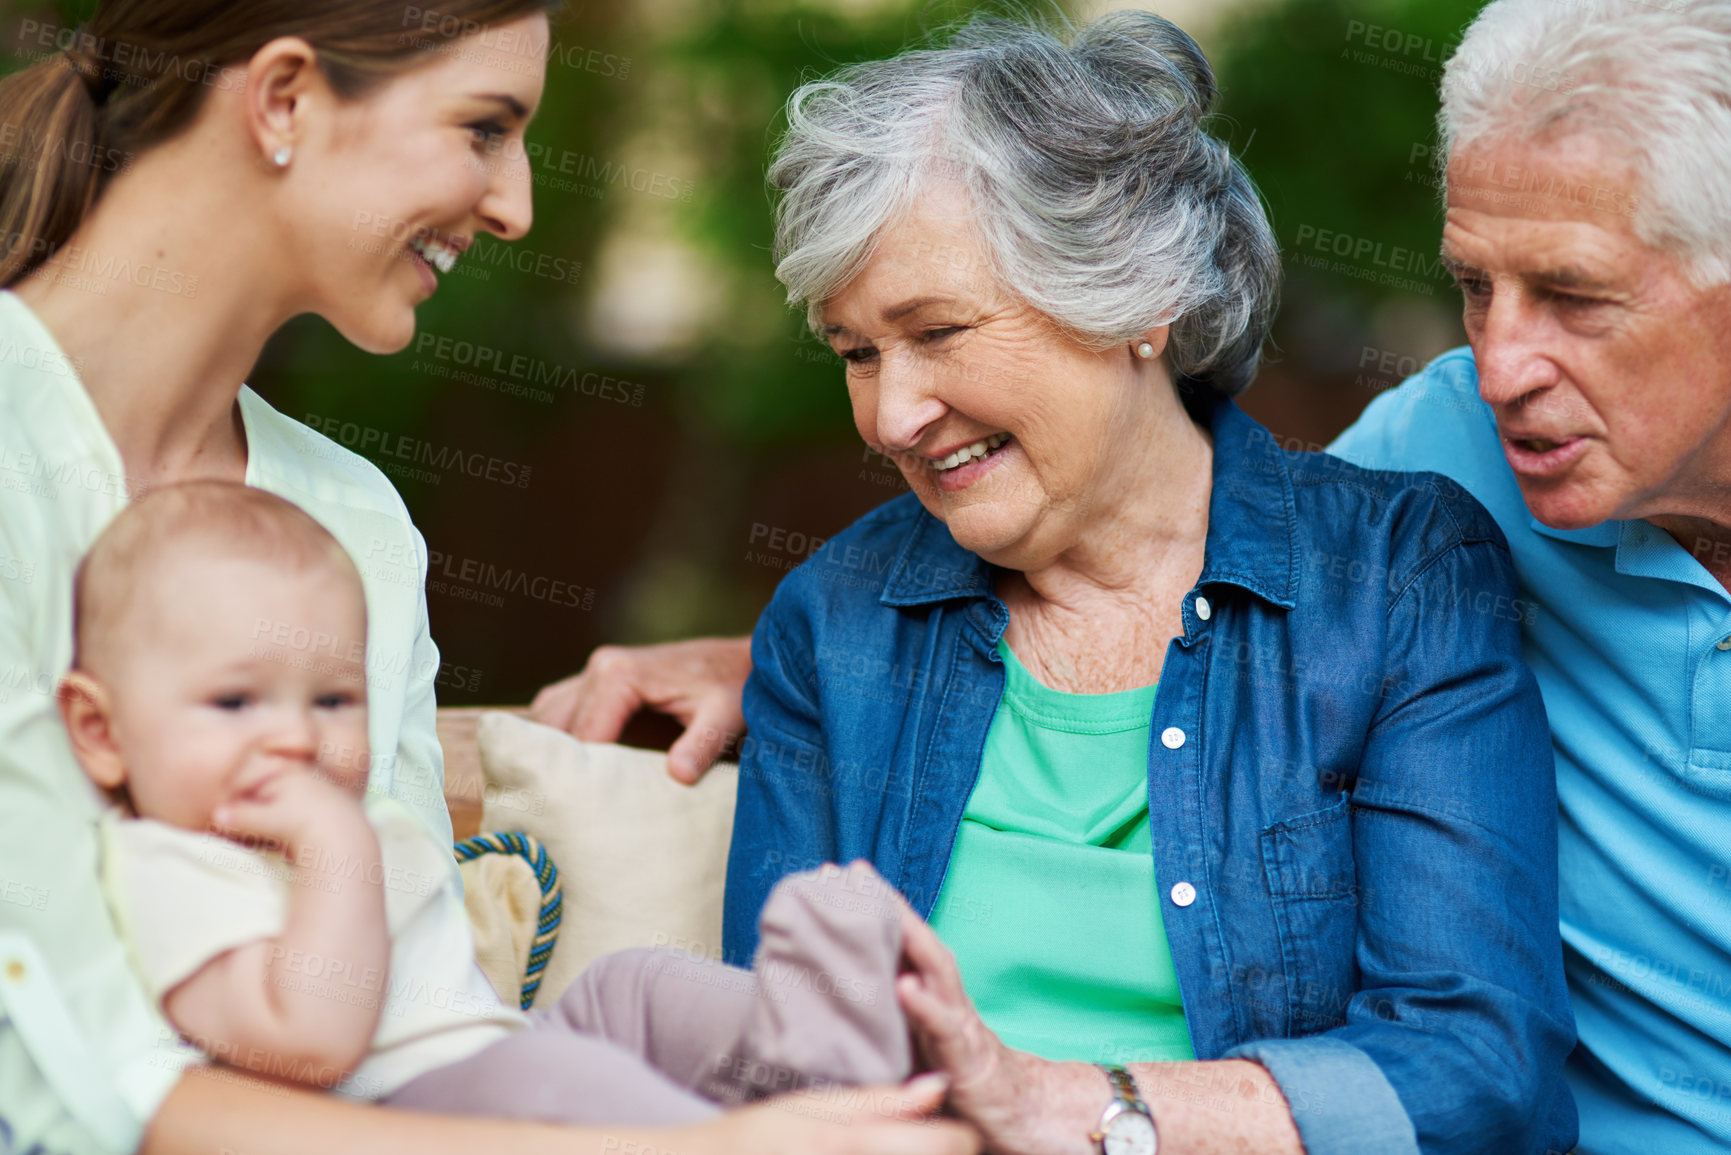 Buy stock photo Cropped shot of a three generational family spending time outdoors